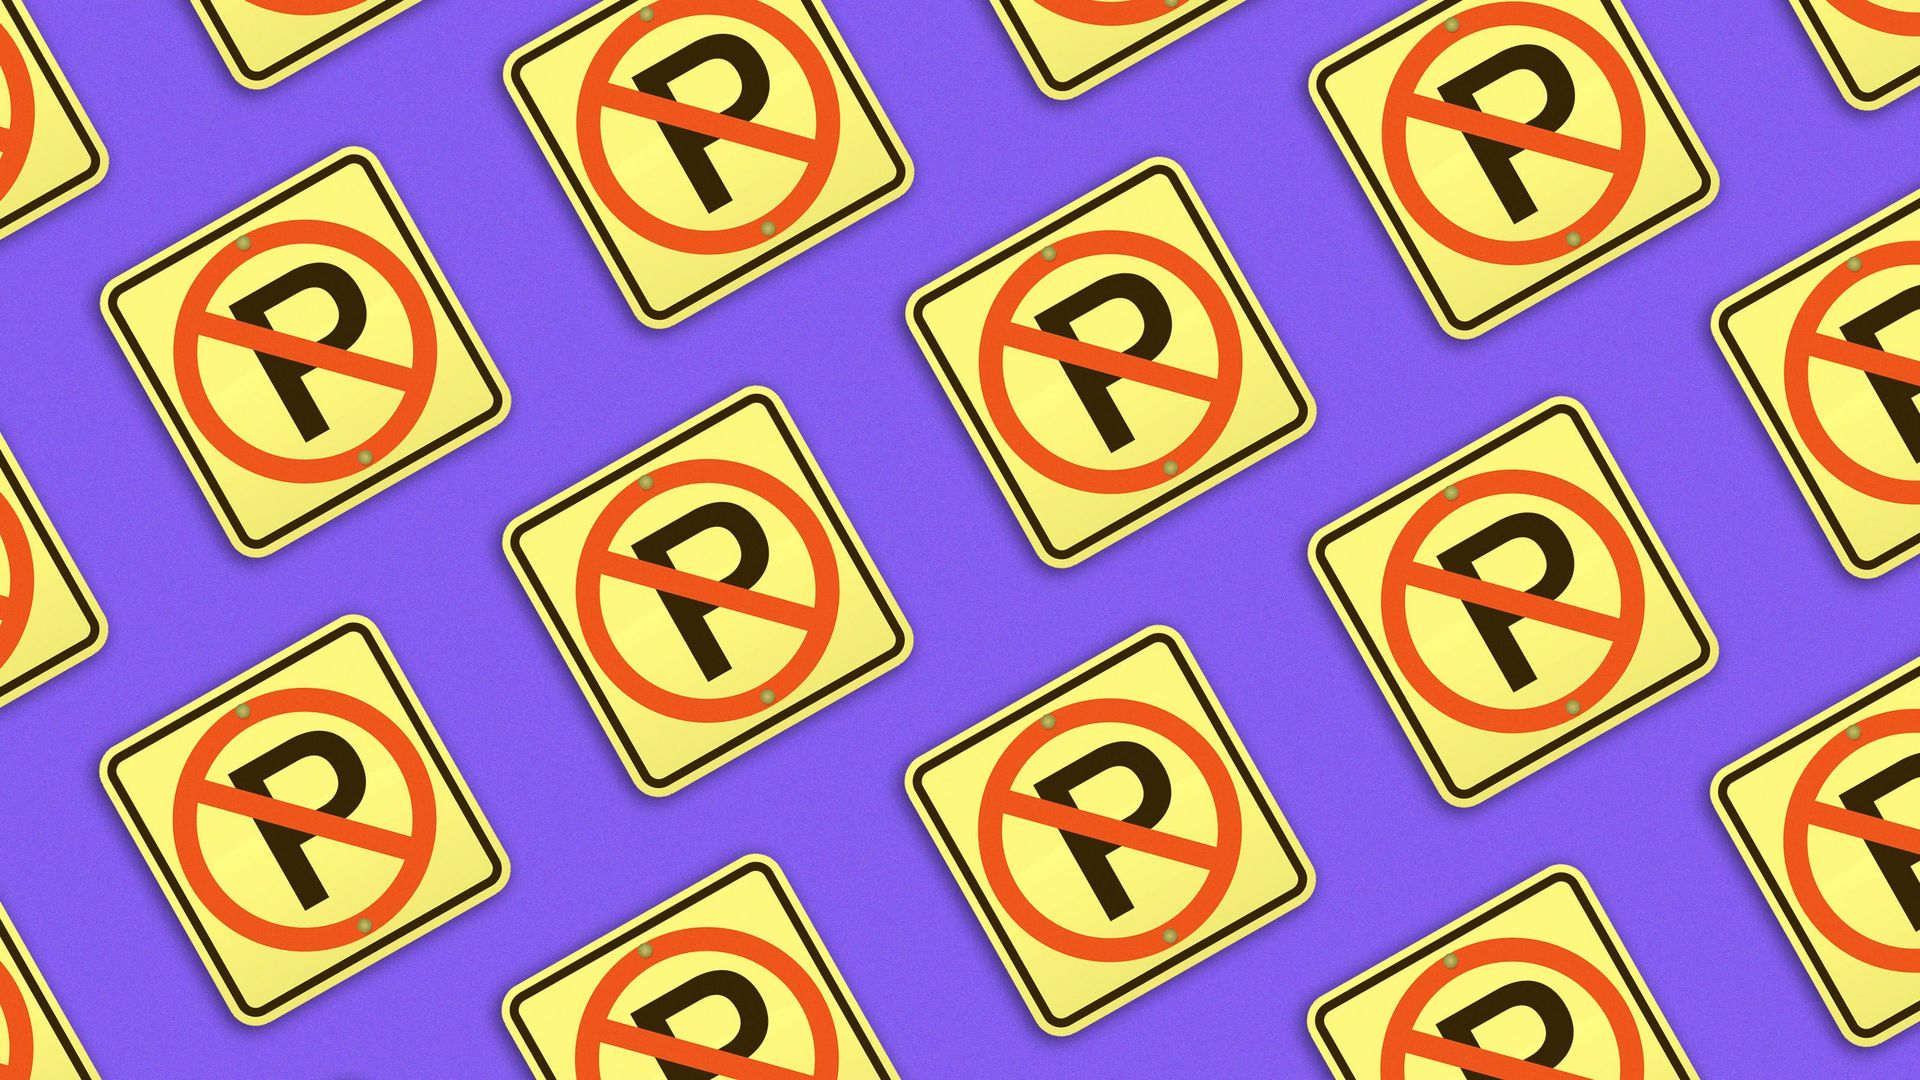 Illustration of a pattern of no parking signs.